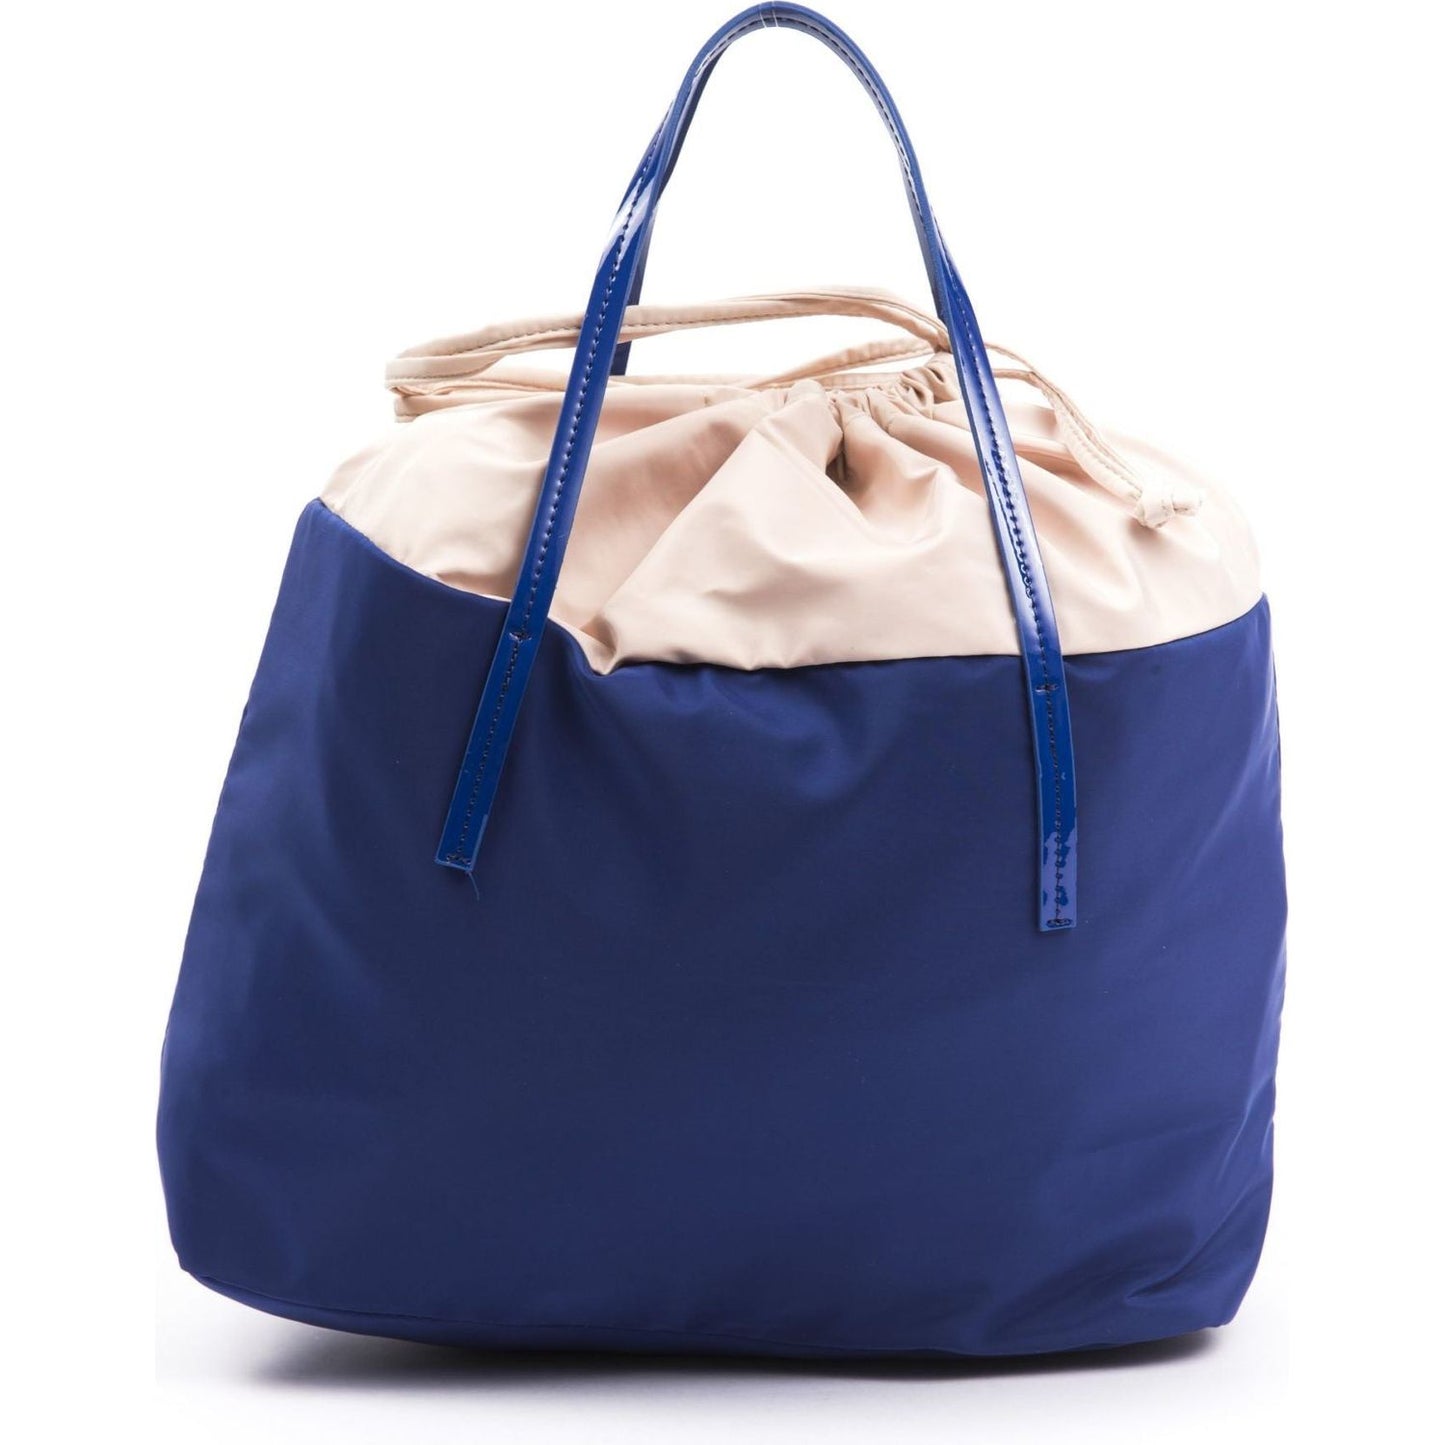 BYBLOS | Chic Blue Fabric Shopper Tote with Patent Accents| McRichard Designer Brands   